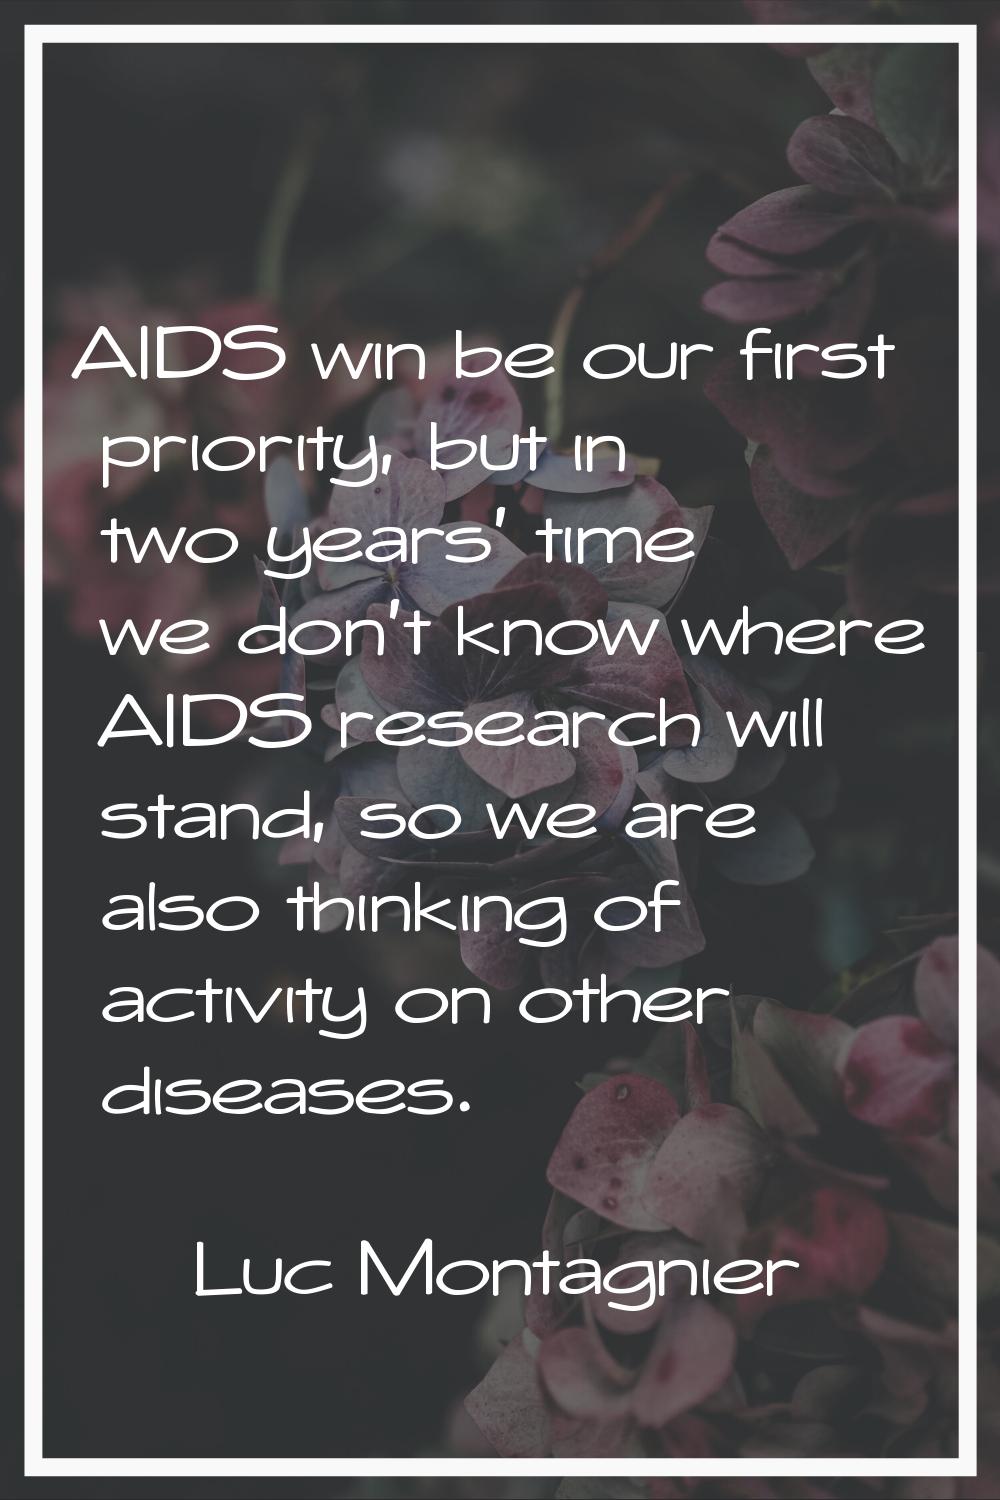 AIDS win be our first priority, but in two years' time we don't know where AIDS research will stand